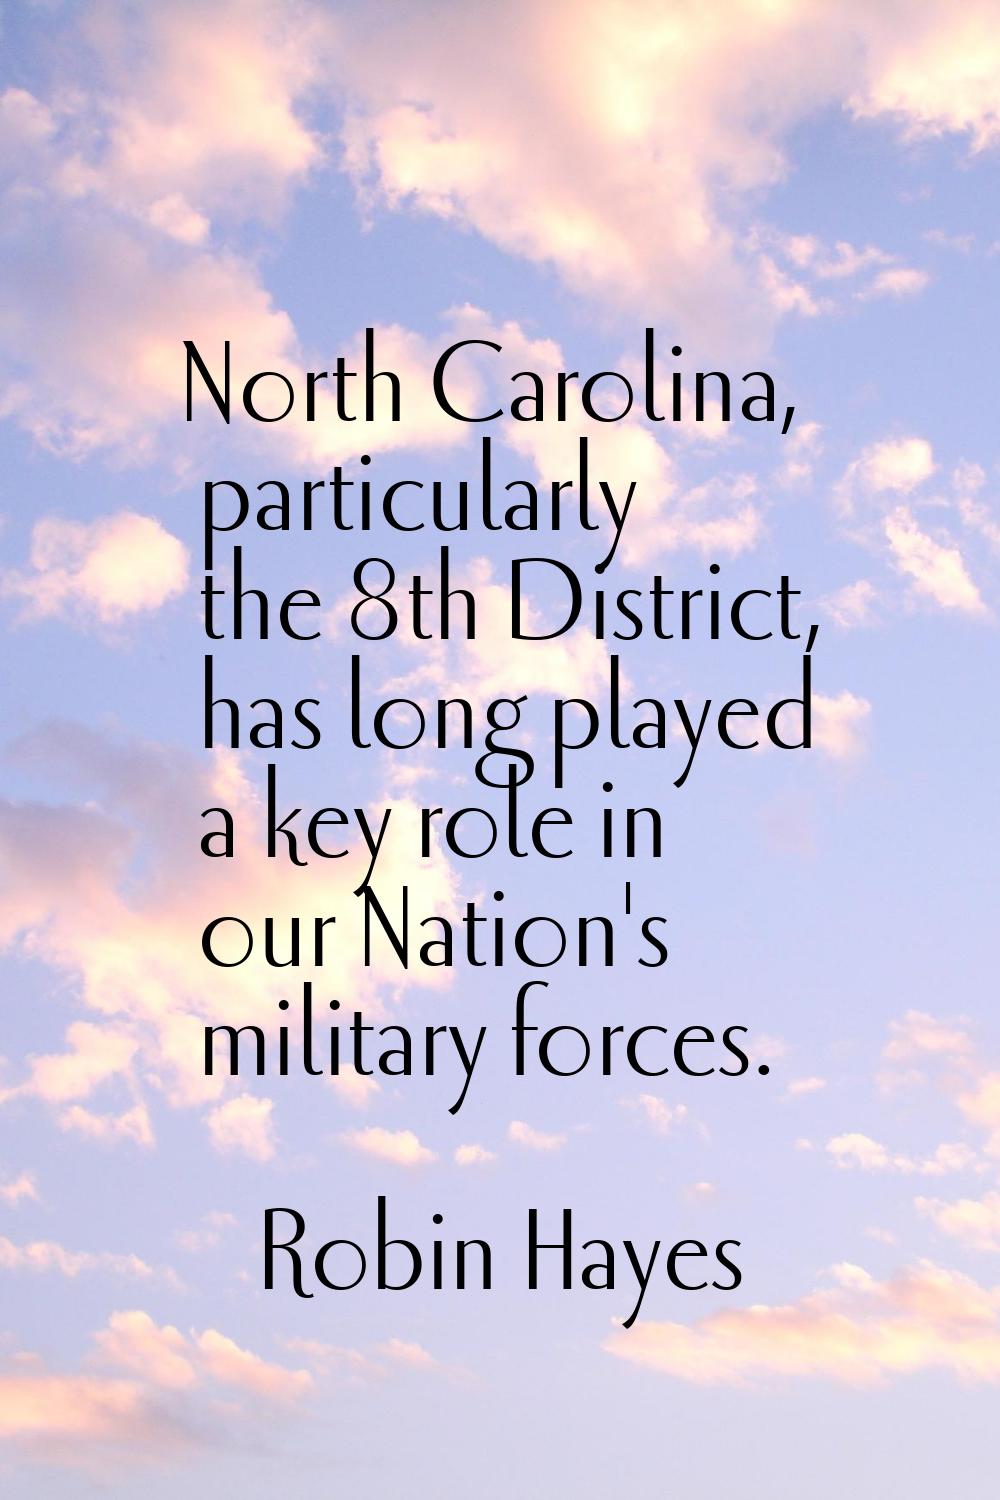 North Carolina, particularly the 8th District, has long played a key role in our Nation's military 